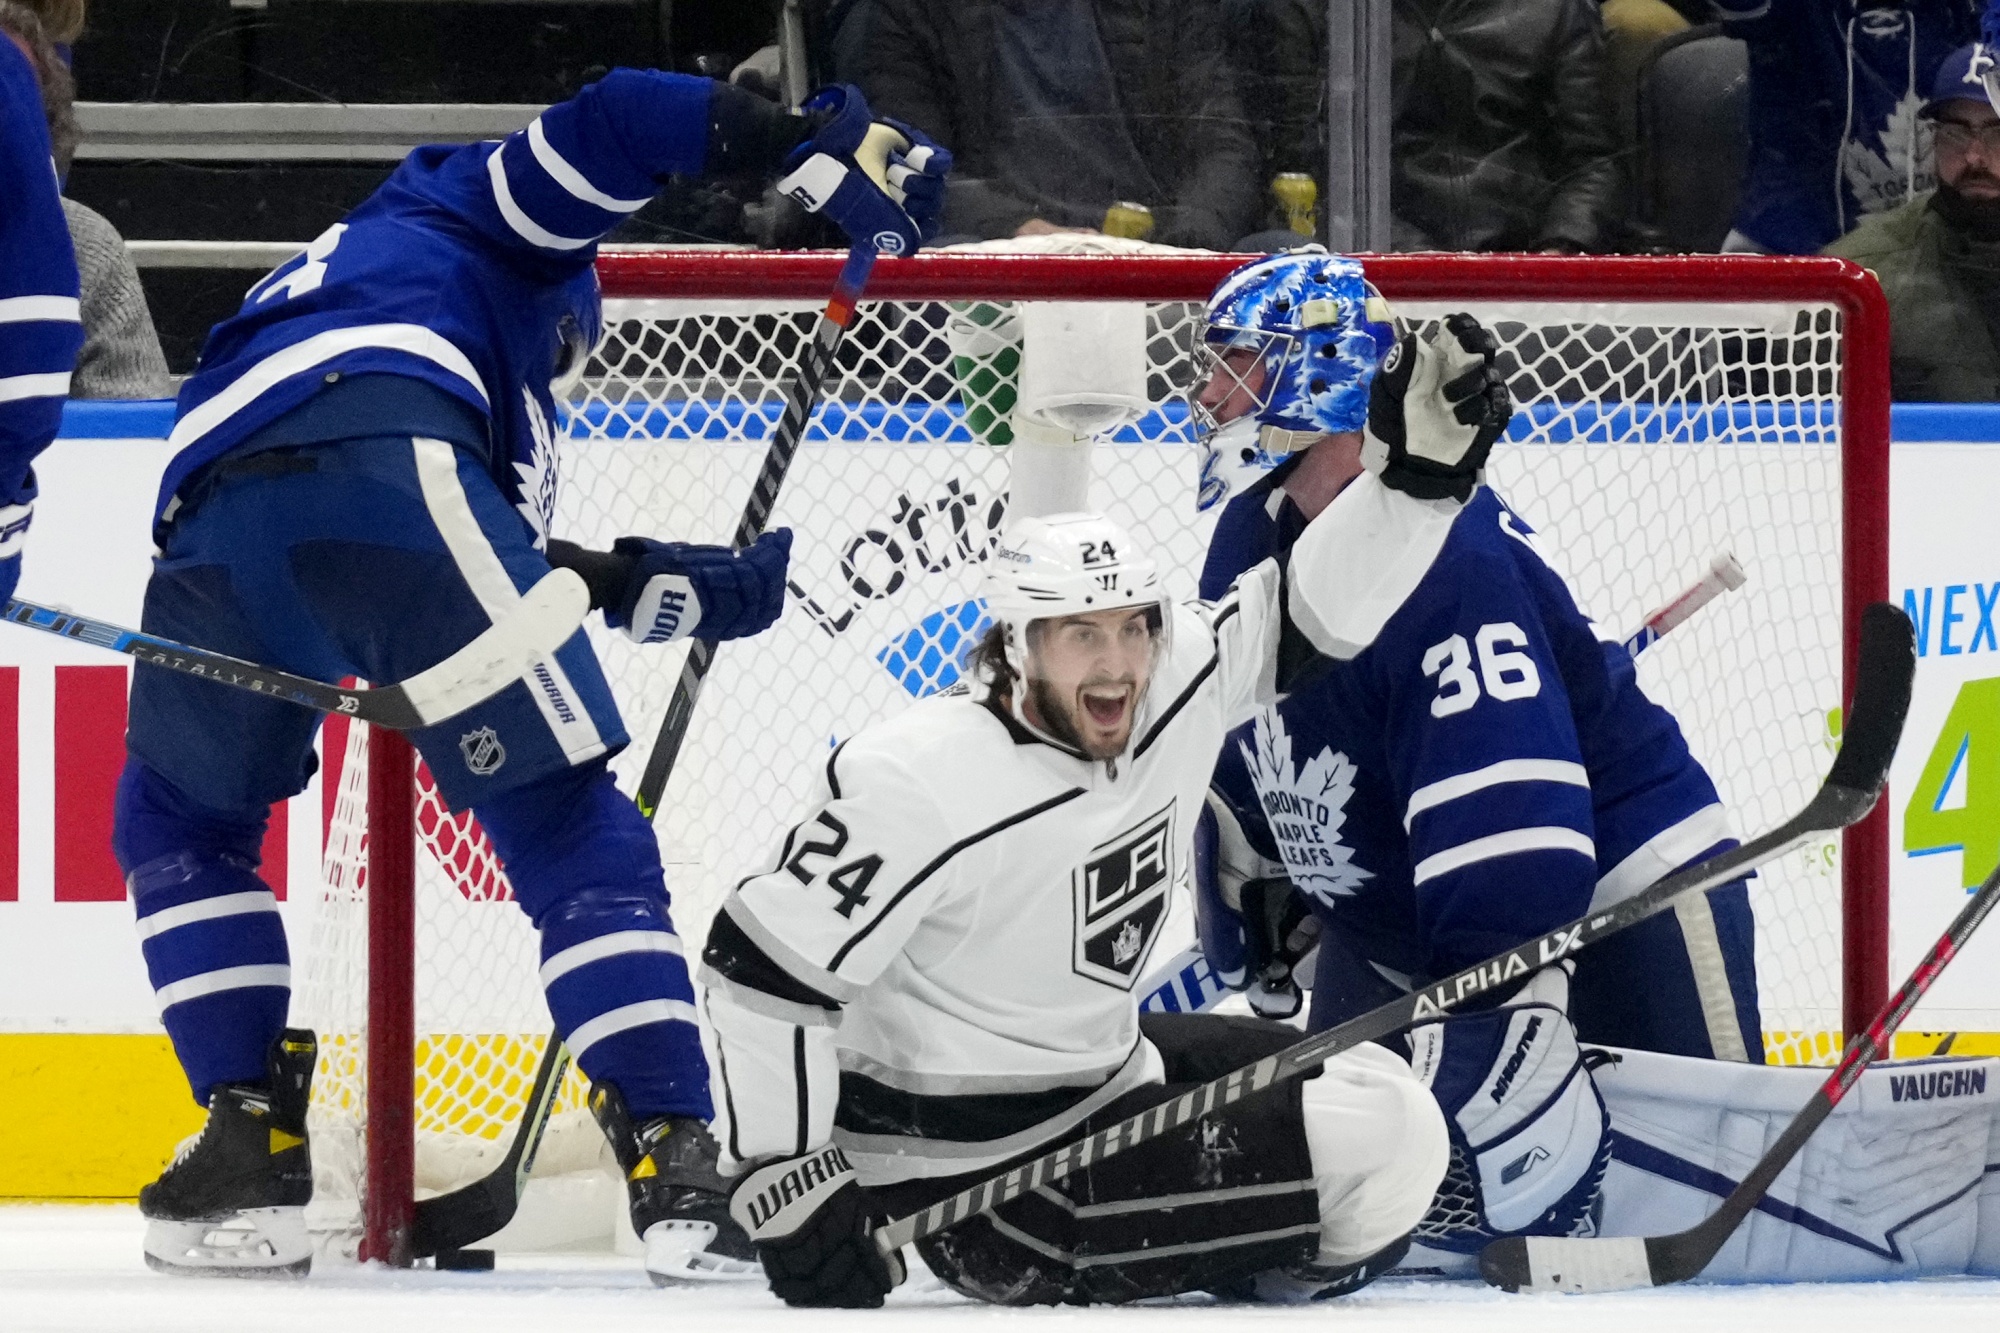 The Wizard Mitch Marner and Maple Leafs Take Care of Business